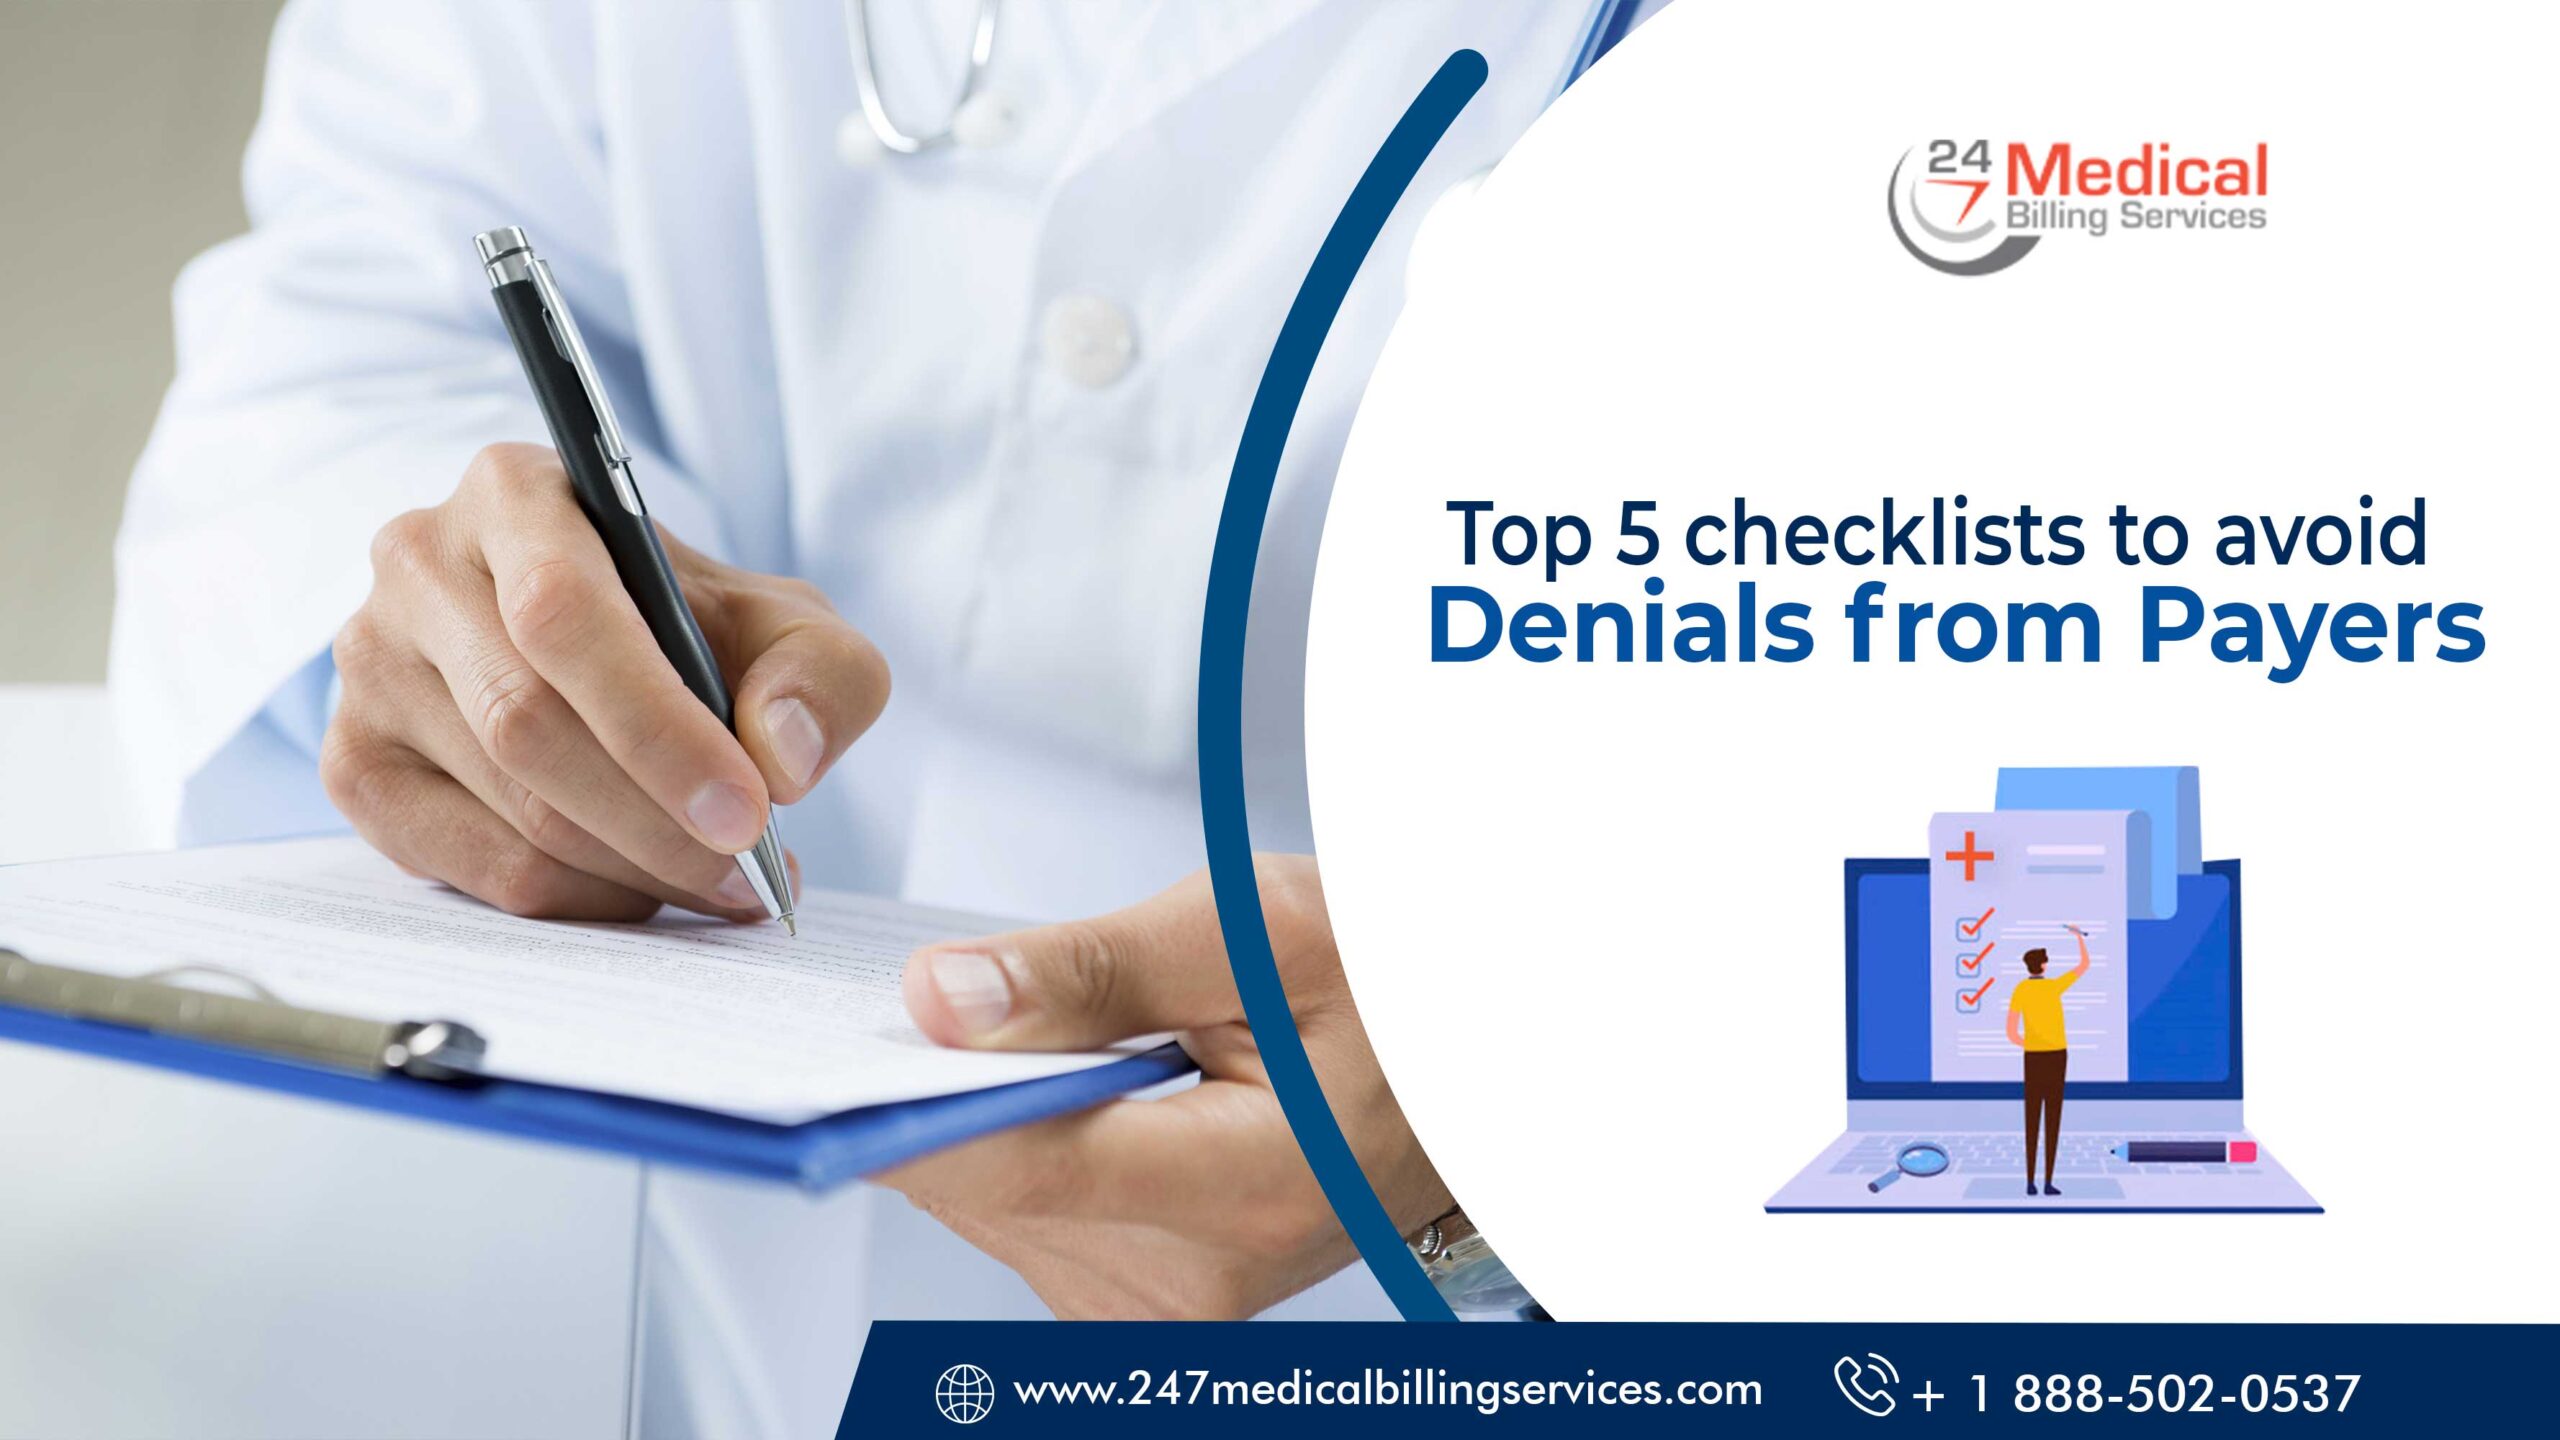  Top 5 checklists to avoid Denials from Payers